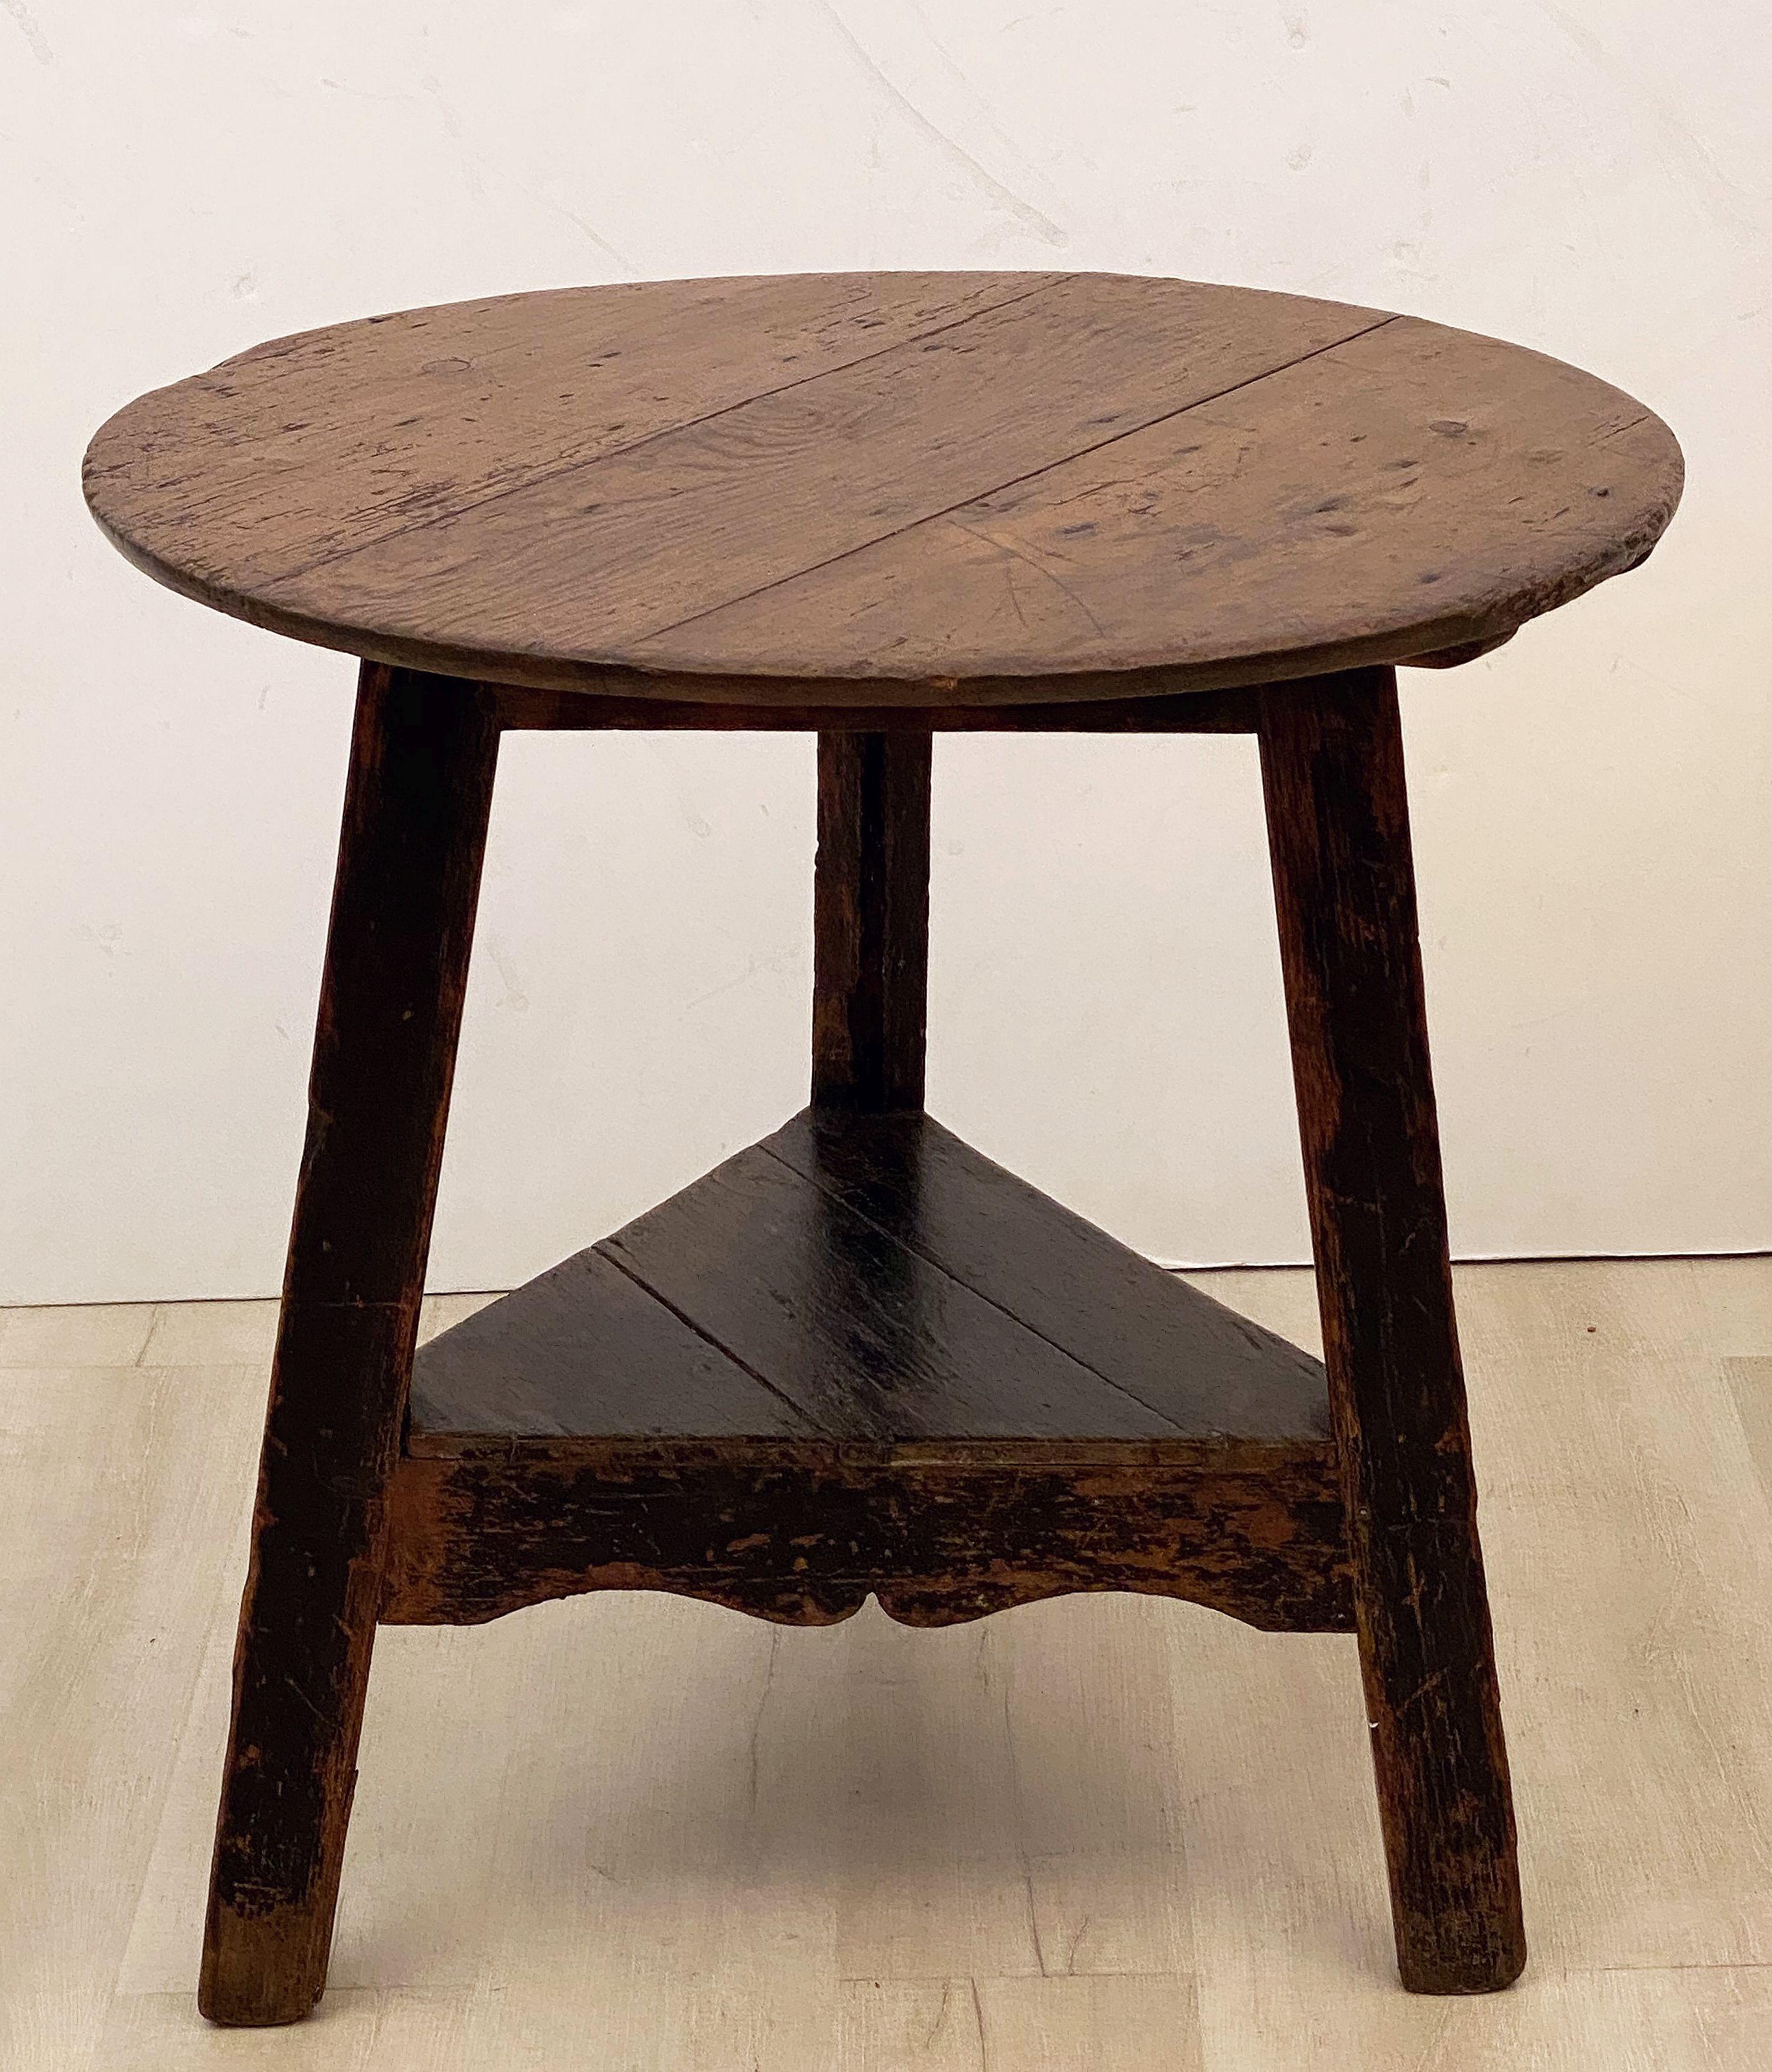 Rustic English Cricket Table of Pine